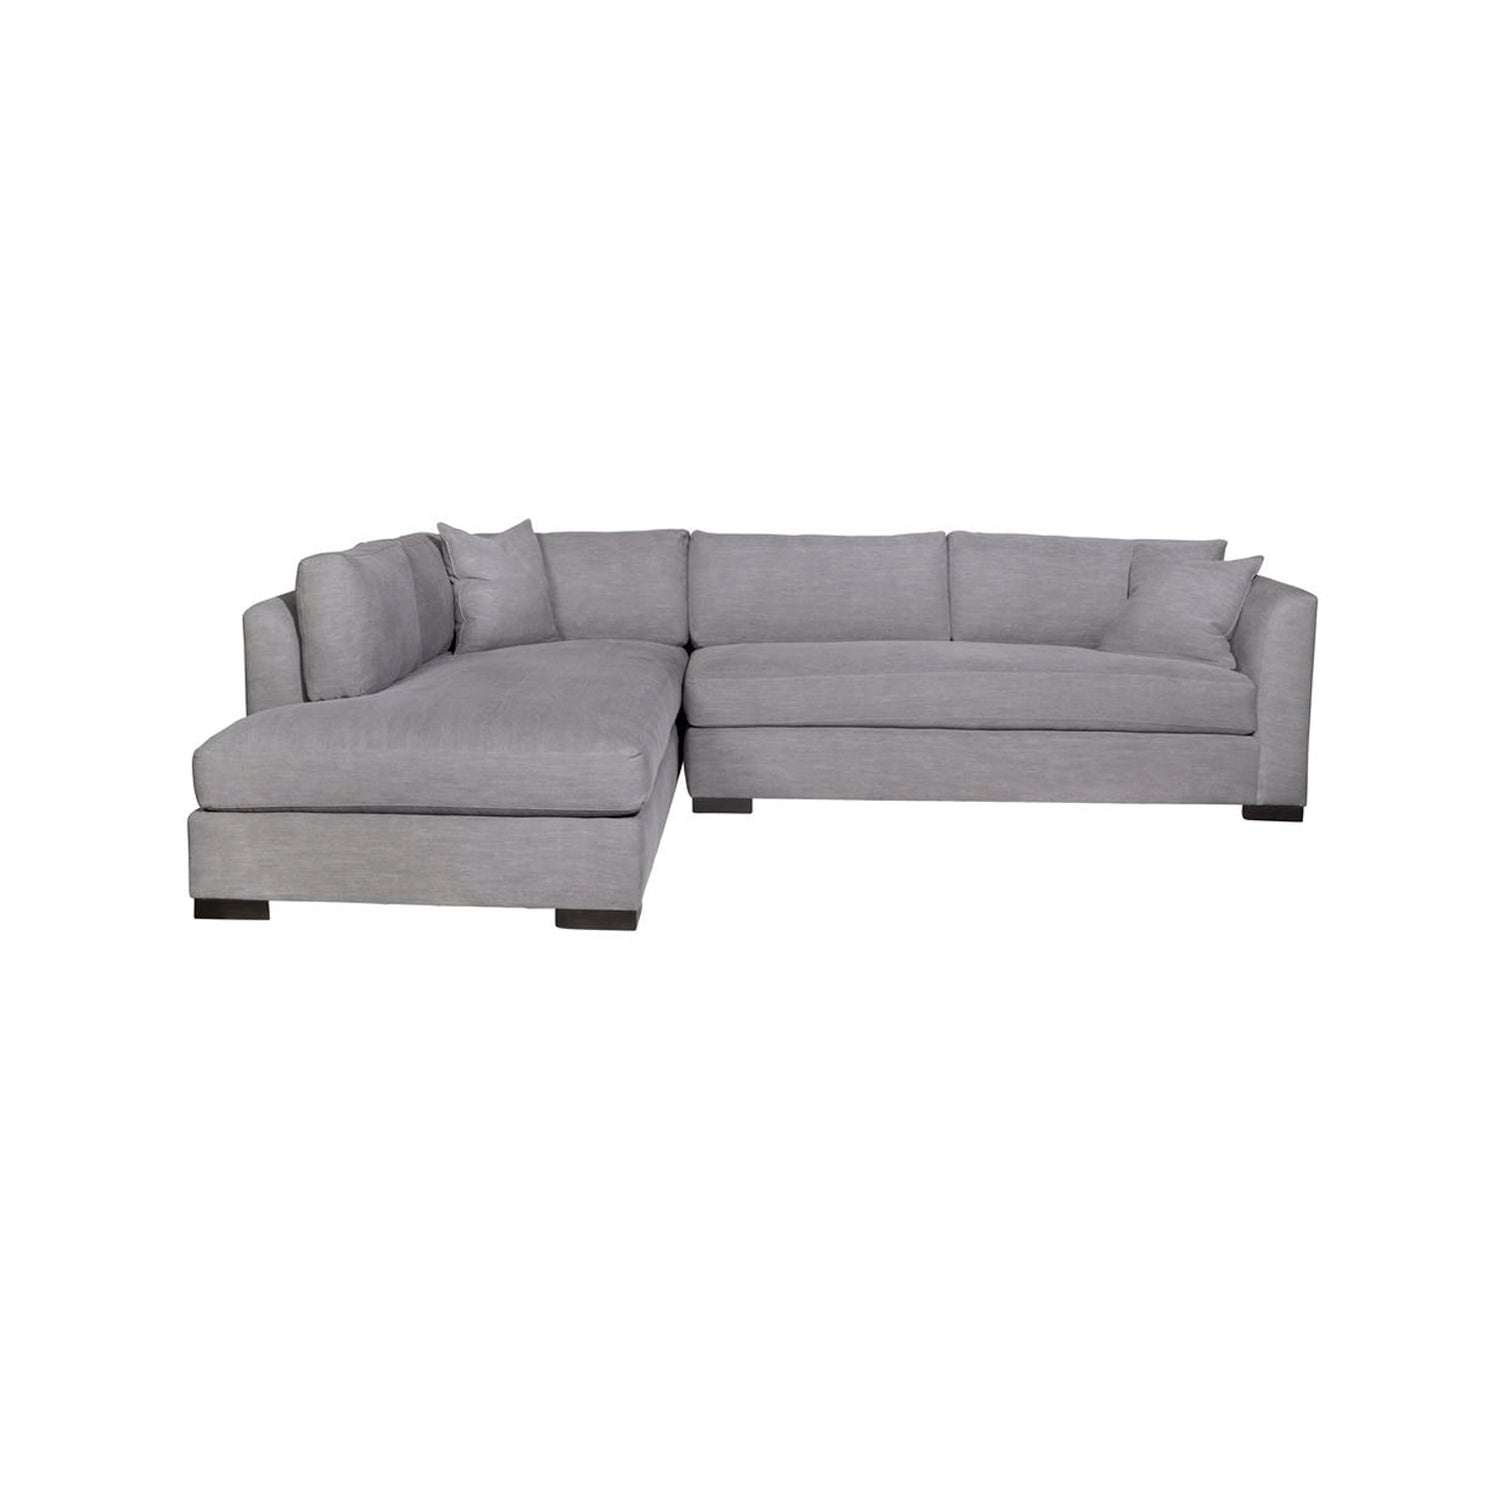 RYDER 2PC SECTIONAL